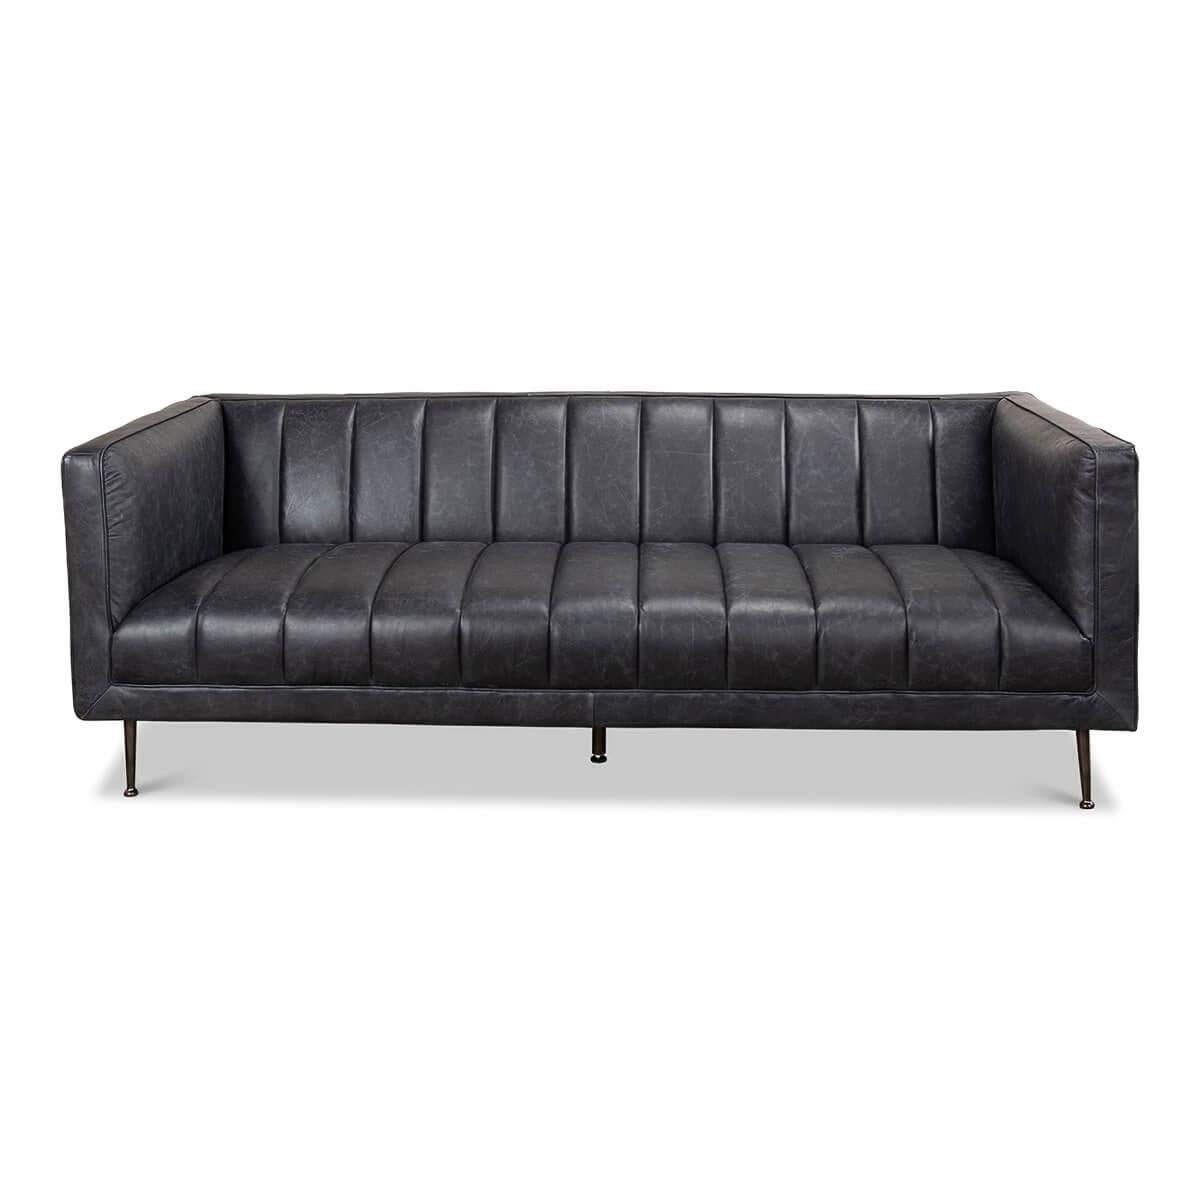 Mid-Century Modern style leather upholstered and channeled sofa. The channel tufted top grain leather sofa in a Nottinghill grey color and raised on steel tapered legs.

Dimensions: 83